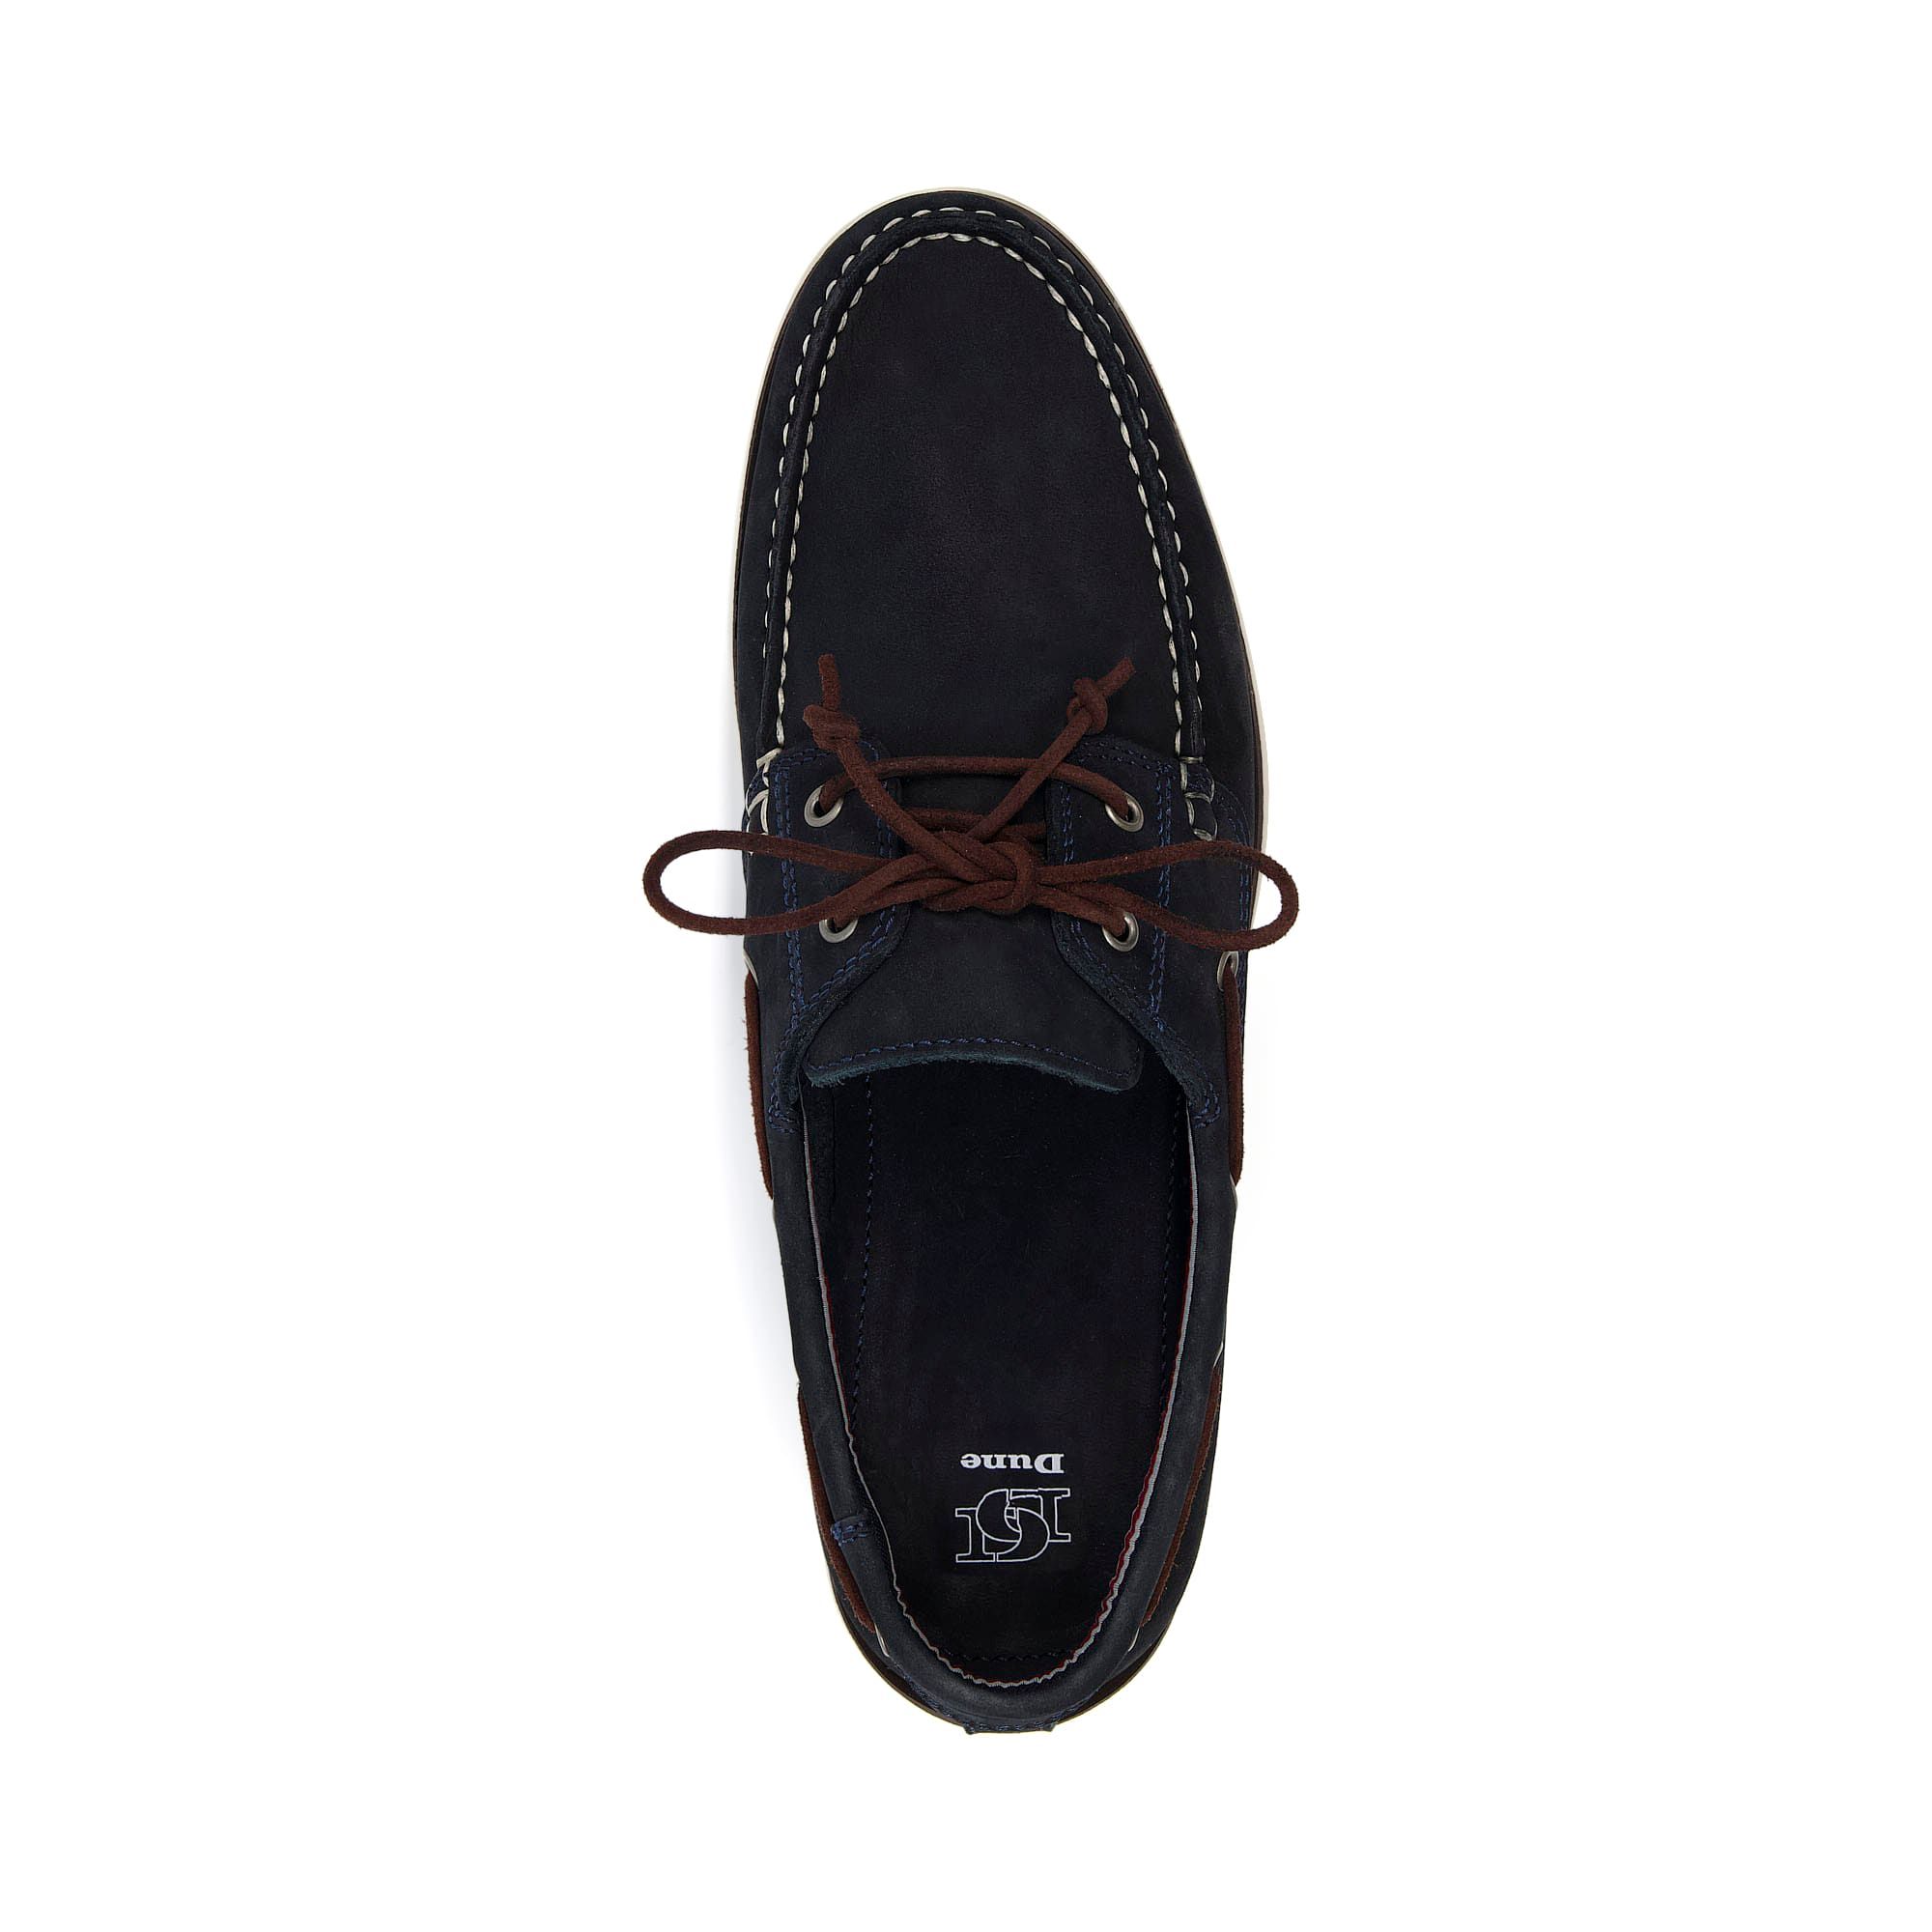 Boat shoes perfect for the summertime, our Bluesy style is made in soft leather. This classic pair features tonal nubuck laces and a contrast sole.